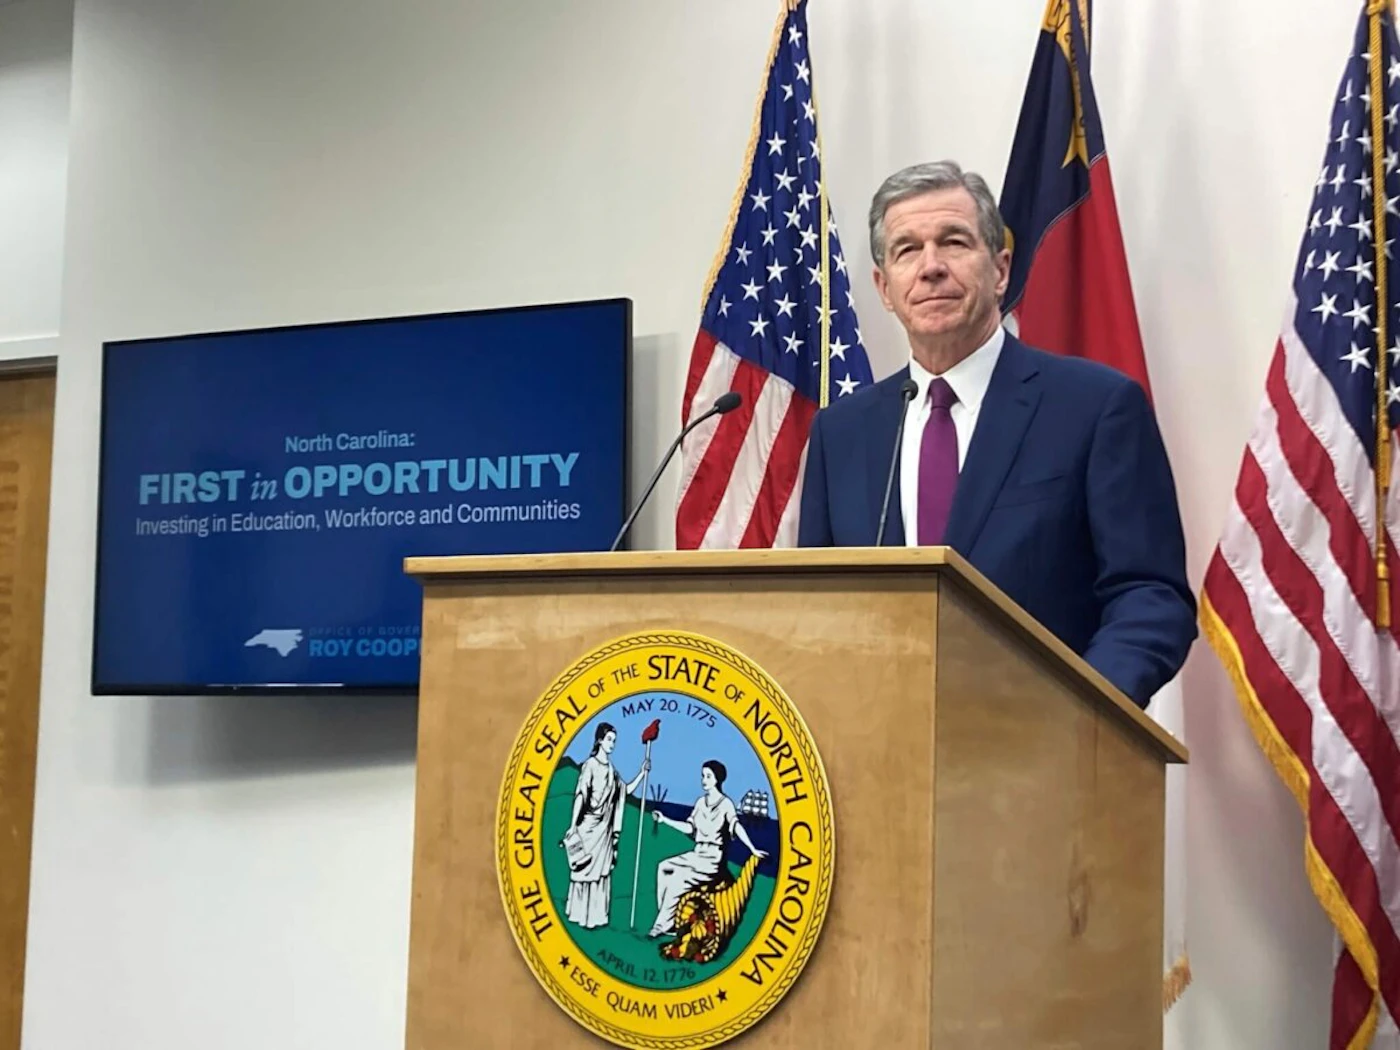 North Carolina Gov. Roy Cooper speaks at a news conference to unveil his two-year budget proposal at the Administration Building in Raleigh, N.C., on Wednesday, March 15, 2023. Cooper's spending plan would grow by well over 20% compared to this year's spending levels, including large raises for teachers and state employees and public education funding boosts to comply with the results of long-running litigation over education inequities. (AP Photo/Gary D. Robertson)